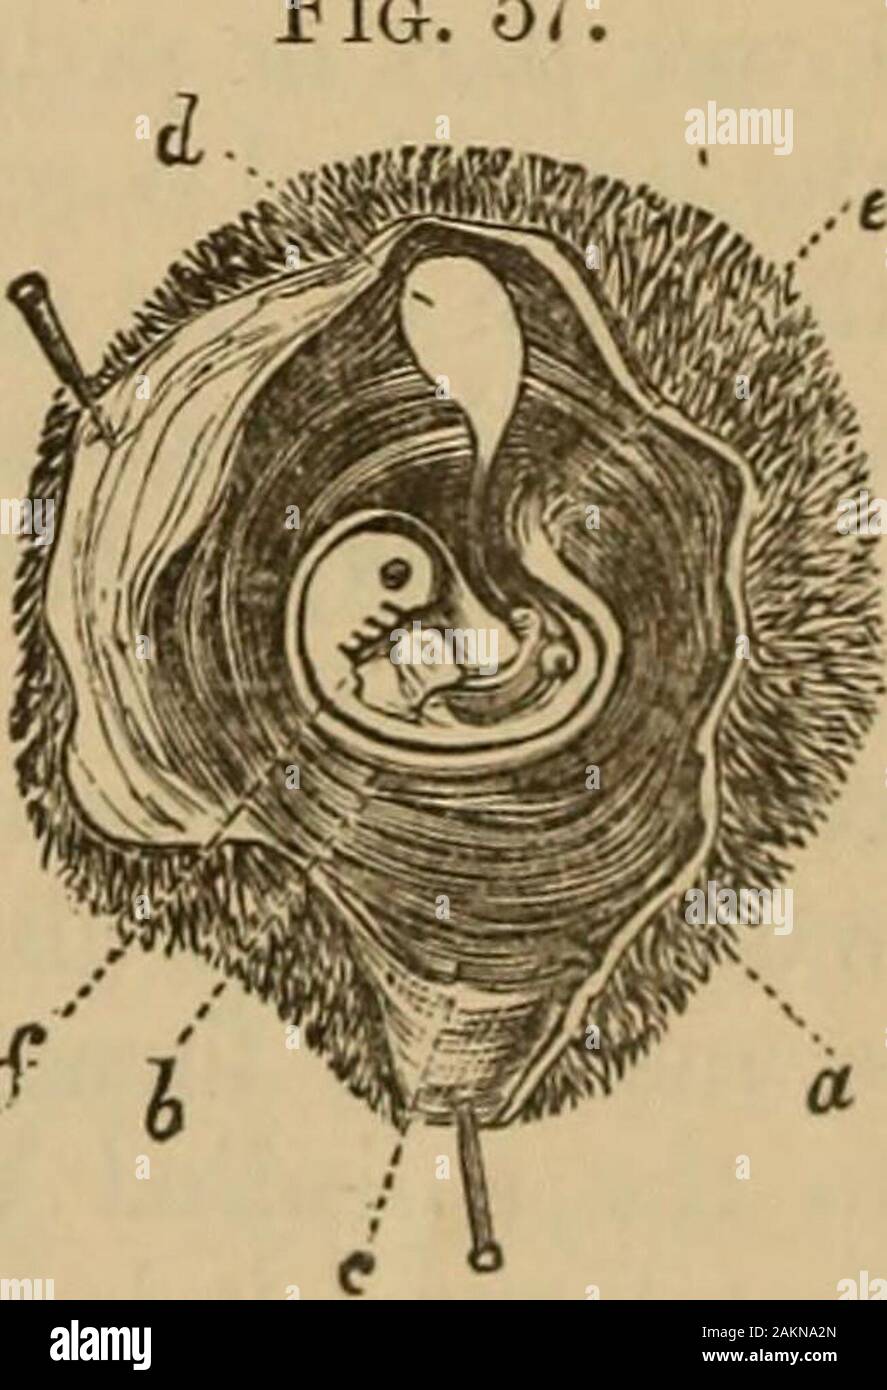 A treatise on the science and practice of midwifery . placentalend of the umbilical cord at the full period of preg-nancy. The umbilical vesicle is filled with a yel-lowish fluid, containing many oil- and fat-globules,similar to the yelk of an egg. The Allantois.—Somewhere about the twentiethday after conception a small vesicle is formed towardthe caudal extremity of the foetus, which is calledthe allantyis. This membrane in mammals is im-portant, as it forms the greater part of the fetalplacenta, a small portion of it remaining inside thebody permanently as the bladder. It begins as adivertic Stock Photo